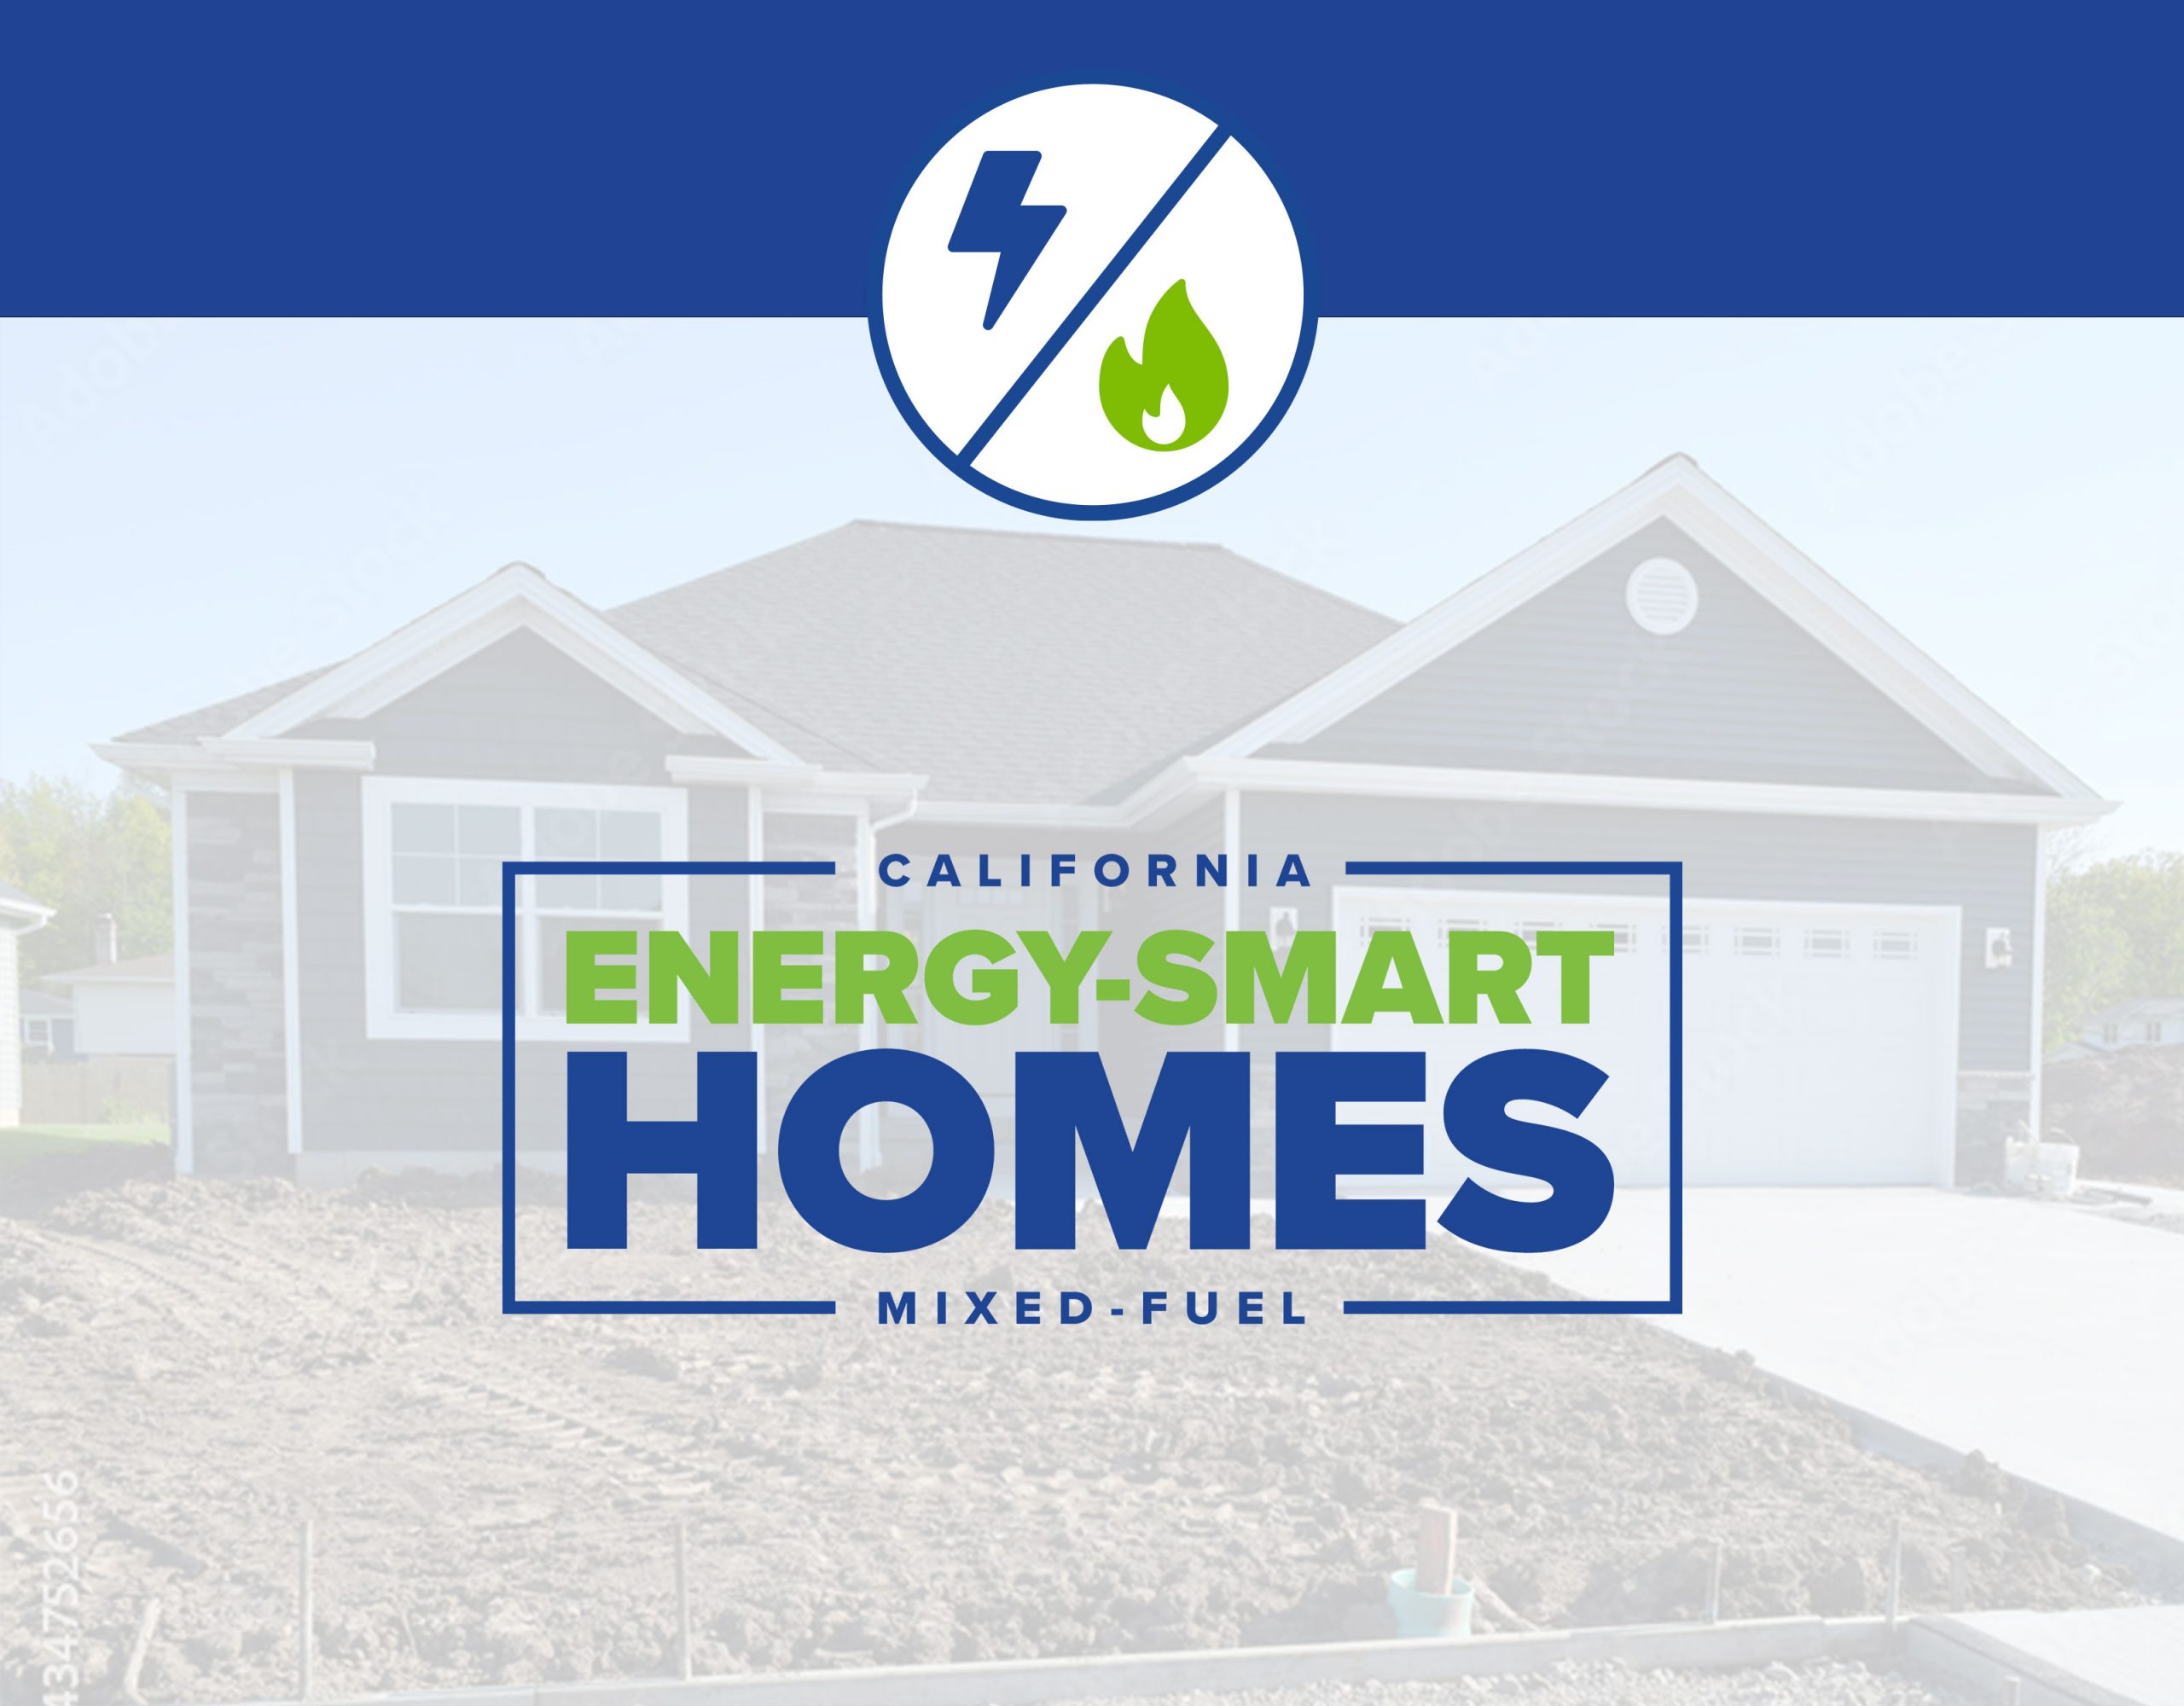 Light / Fire Icon overlayed on an image of a house with California Energy Smart Homes Mixed Fuel Text